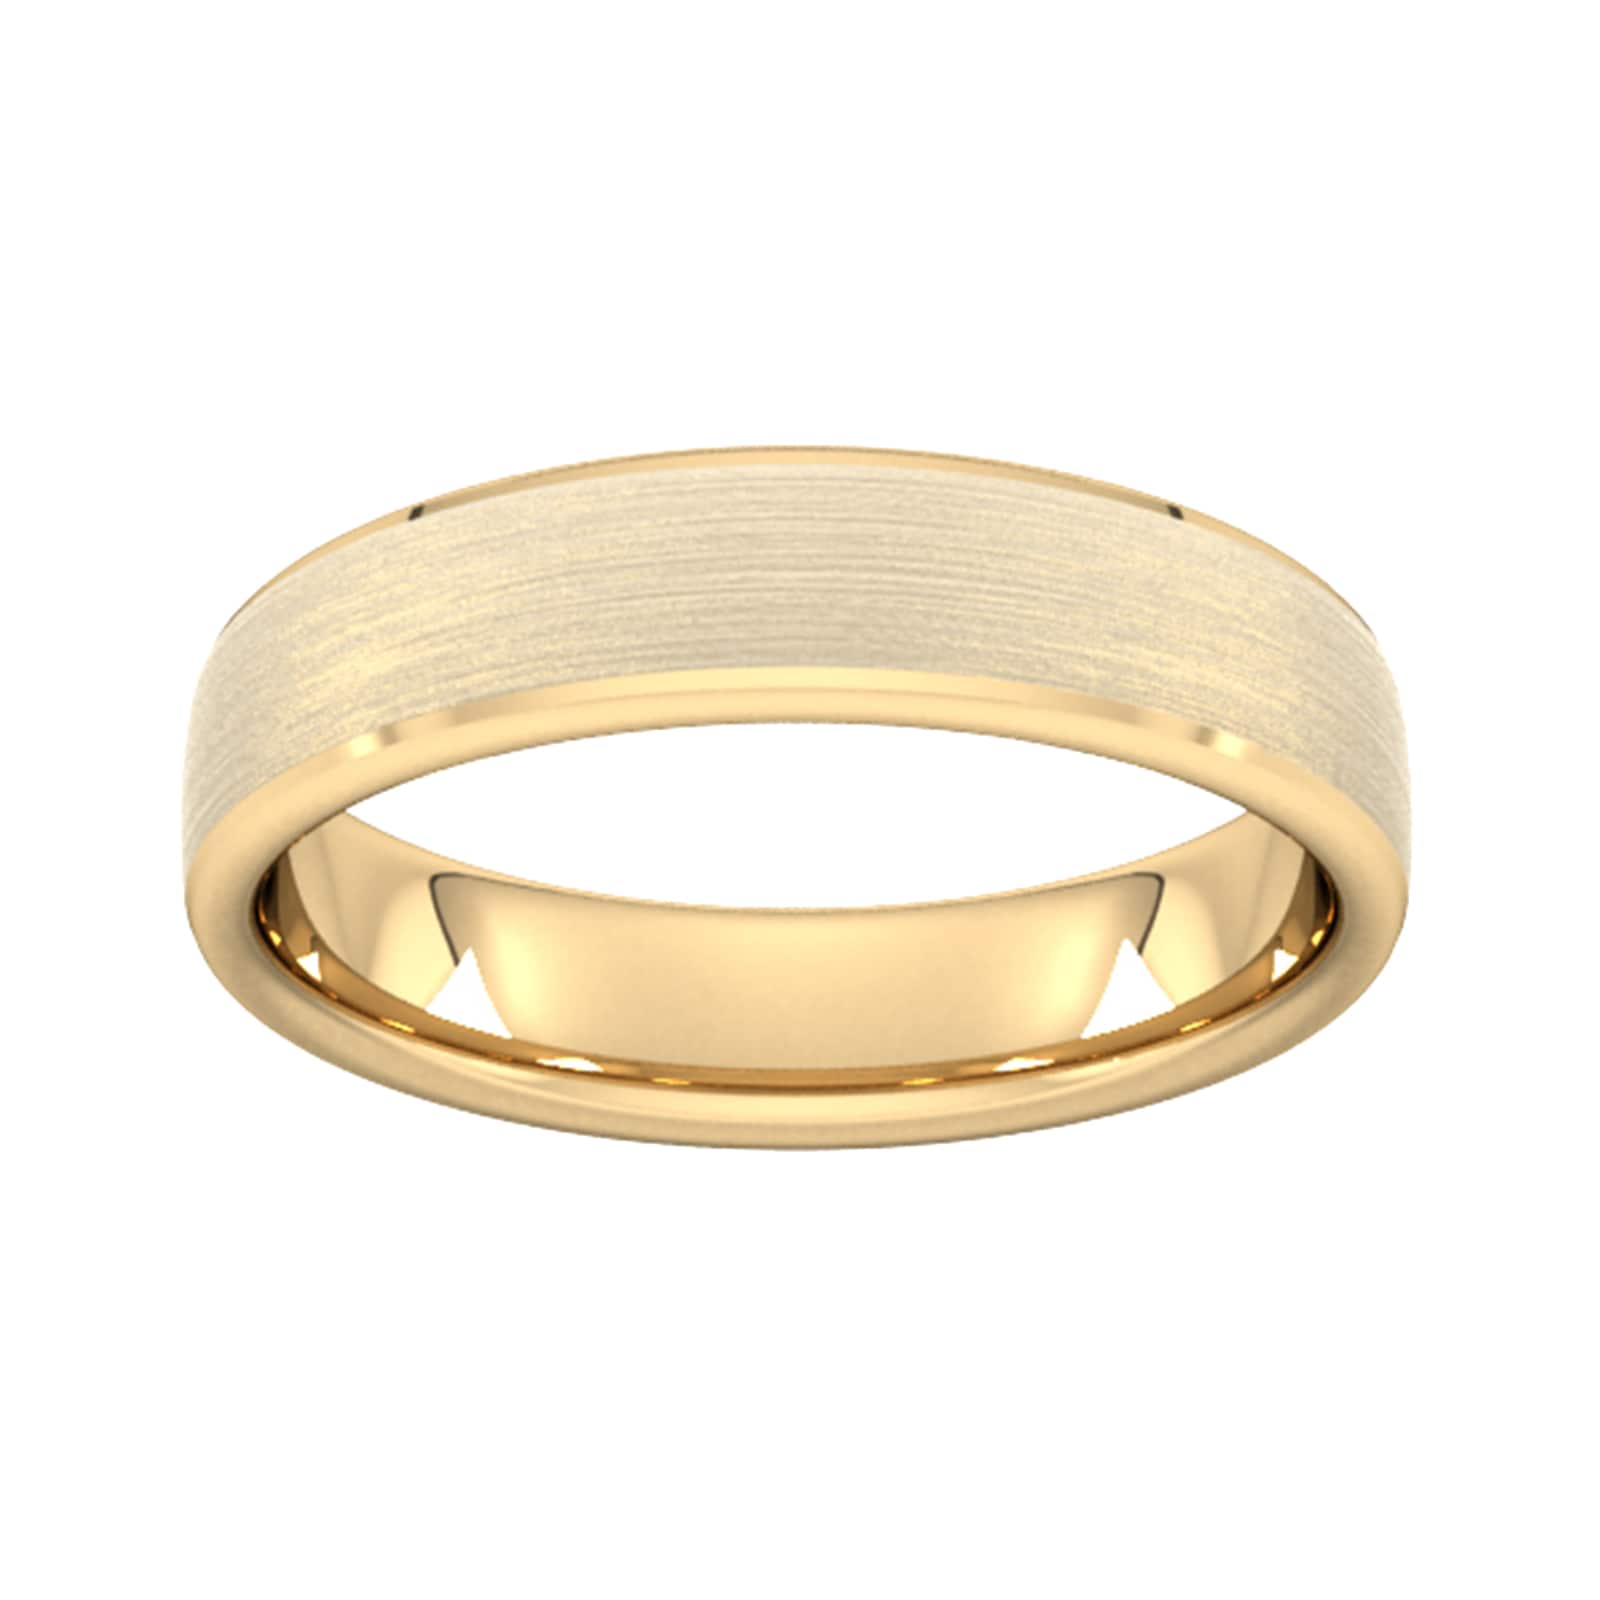 5mm Flat Court Heavy Polished Chamfered Edges With Matt Centre Wedding Ring In 18 Carat Yellow Gold - Ring Size O